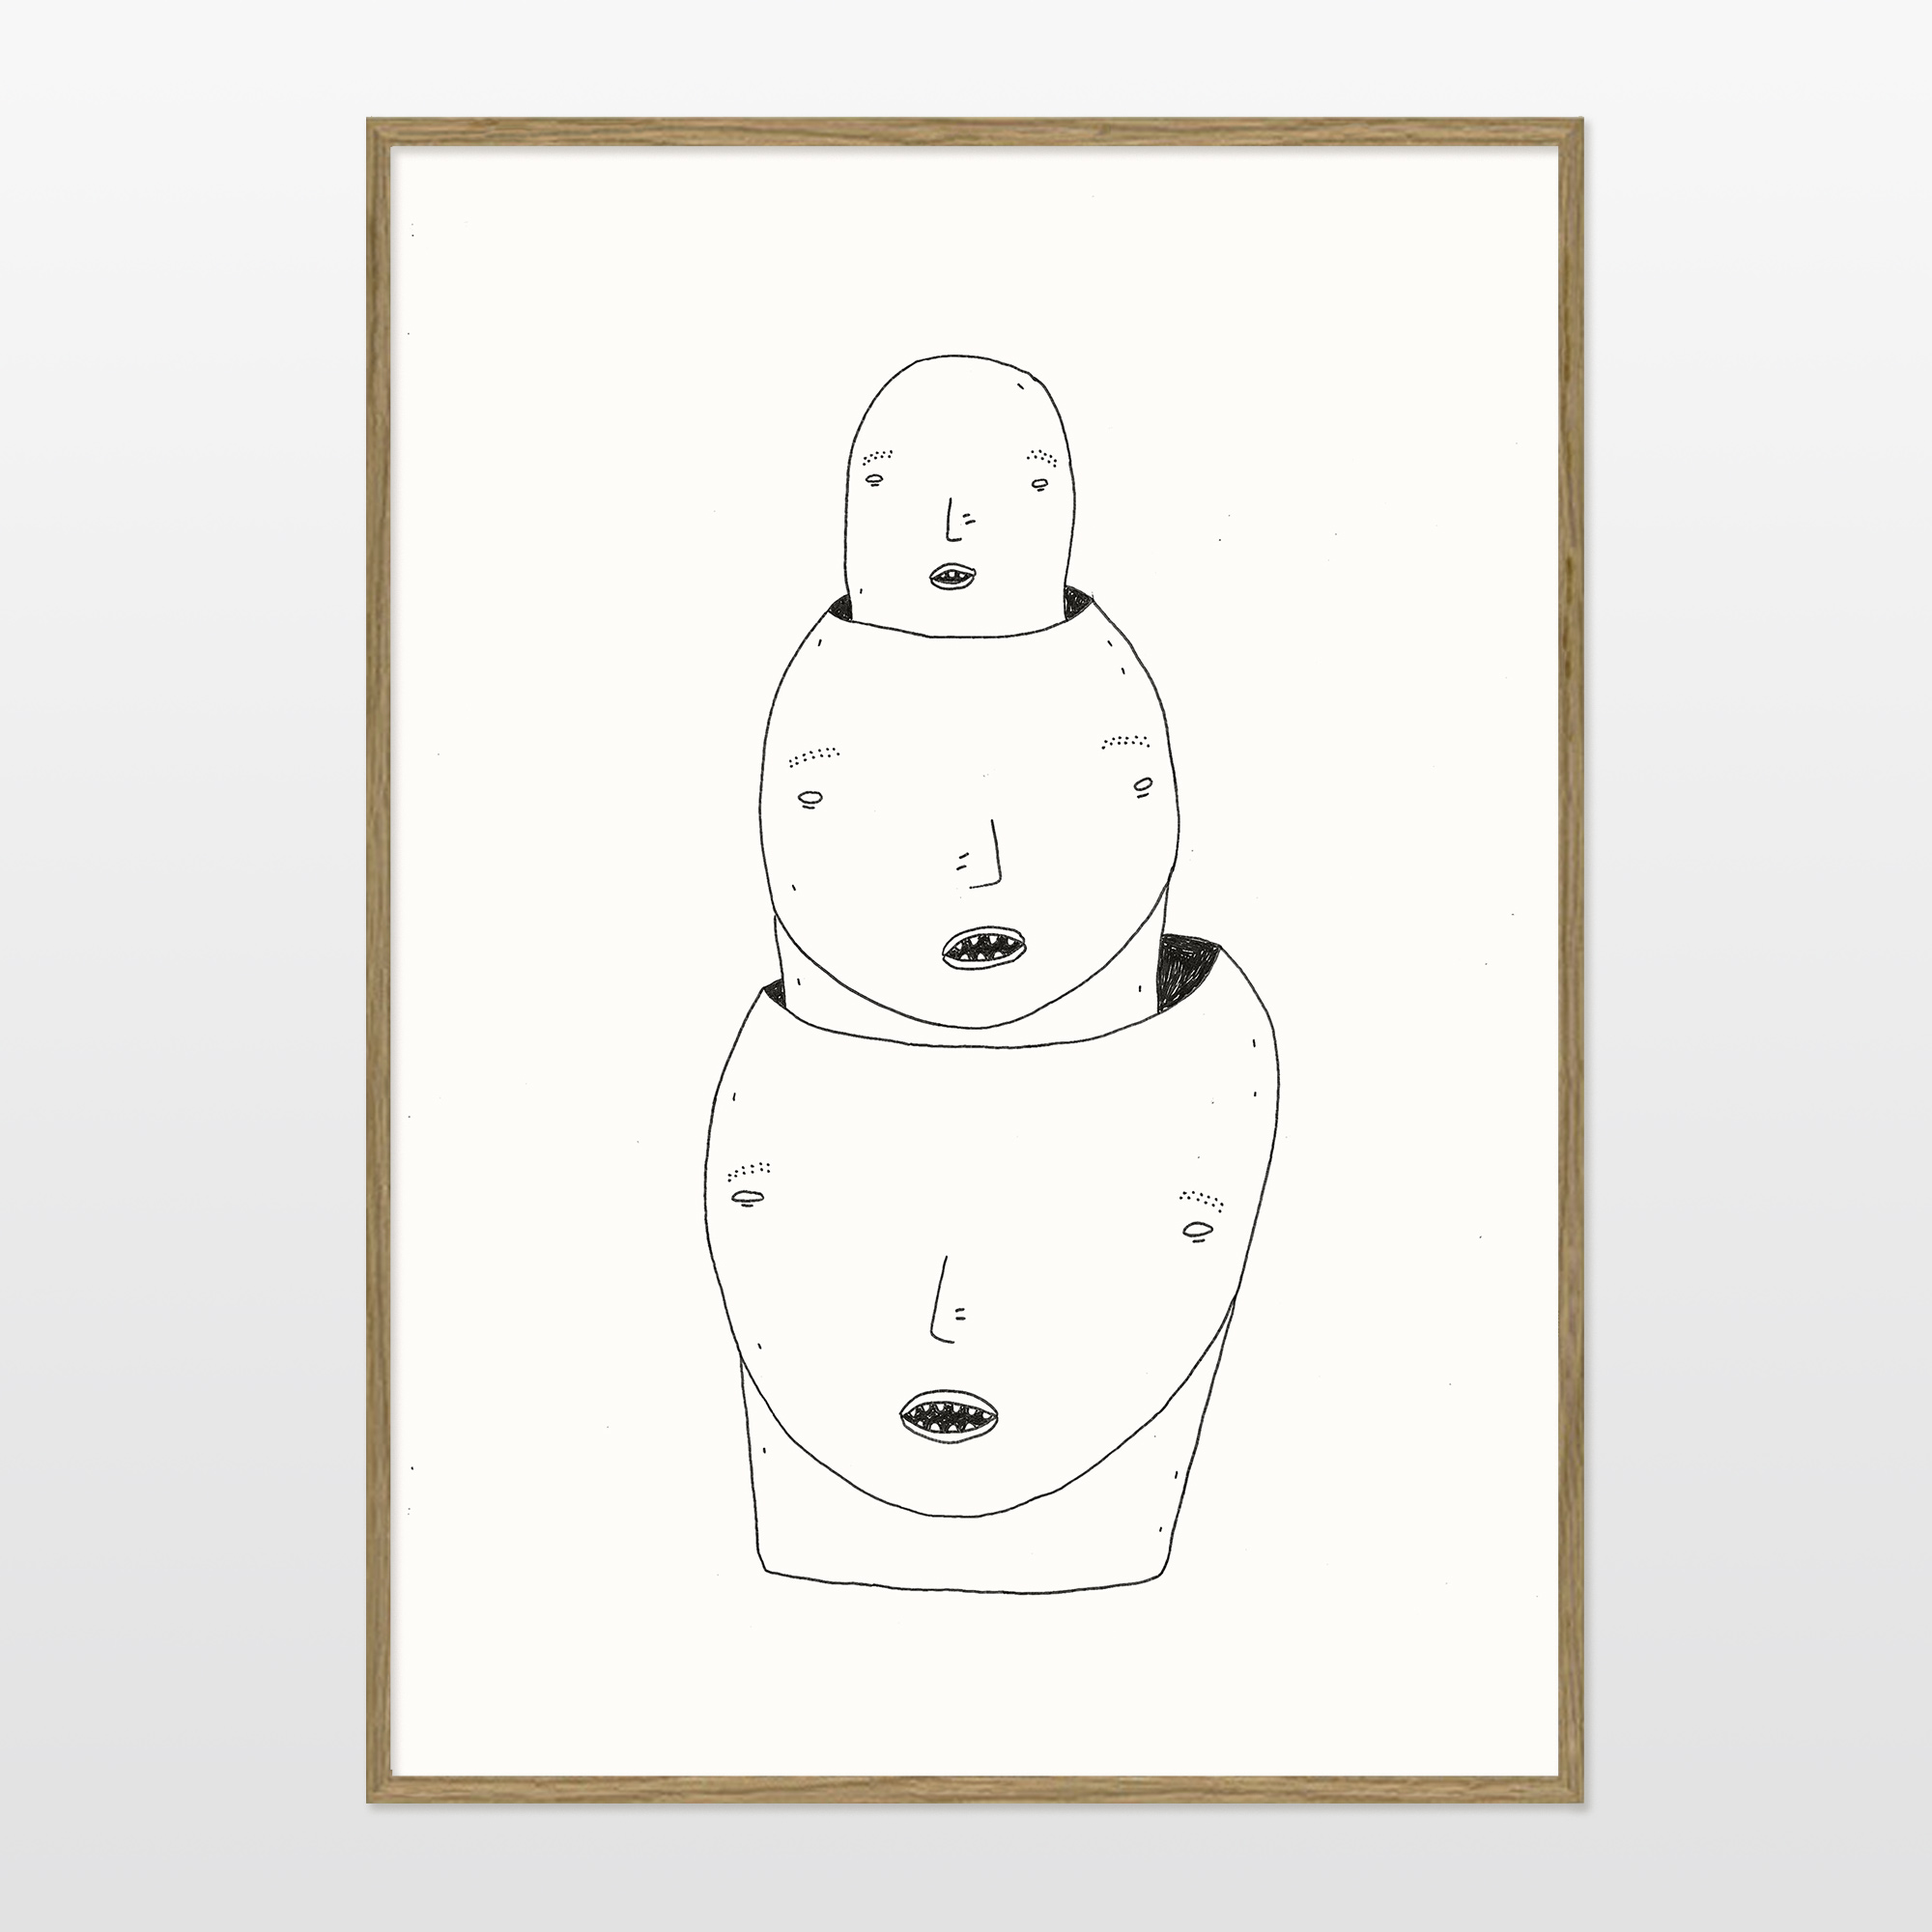 posters-prints, giclee-print, family-friendly, graphical, illustrative, minimalistic, pop, surrealistic, cartoons, humor, people, black, white, artliner, paper, amusing, contemporary-art, dance, decorative, design, faces, interior, interior-design, modern, modern-art, nordic, scandinavien, street-art, Buy original high quality art. Paintings, drawings, limited edition prints & posters by talented artists.